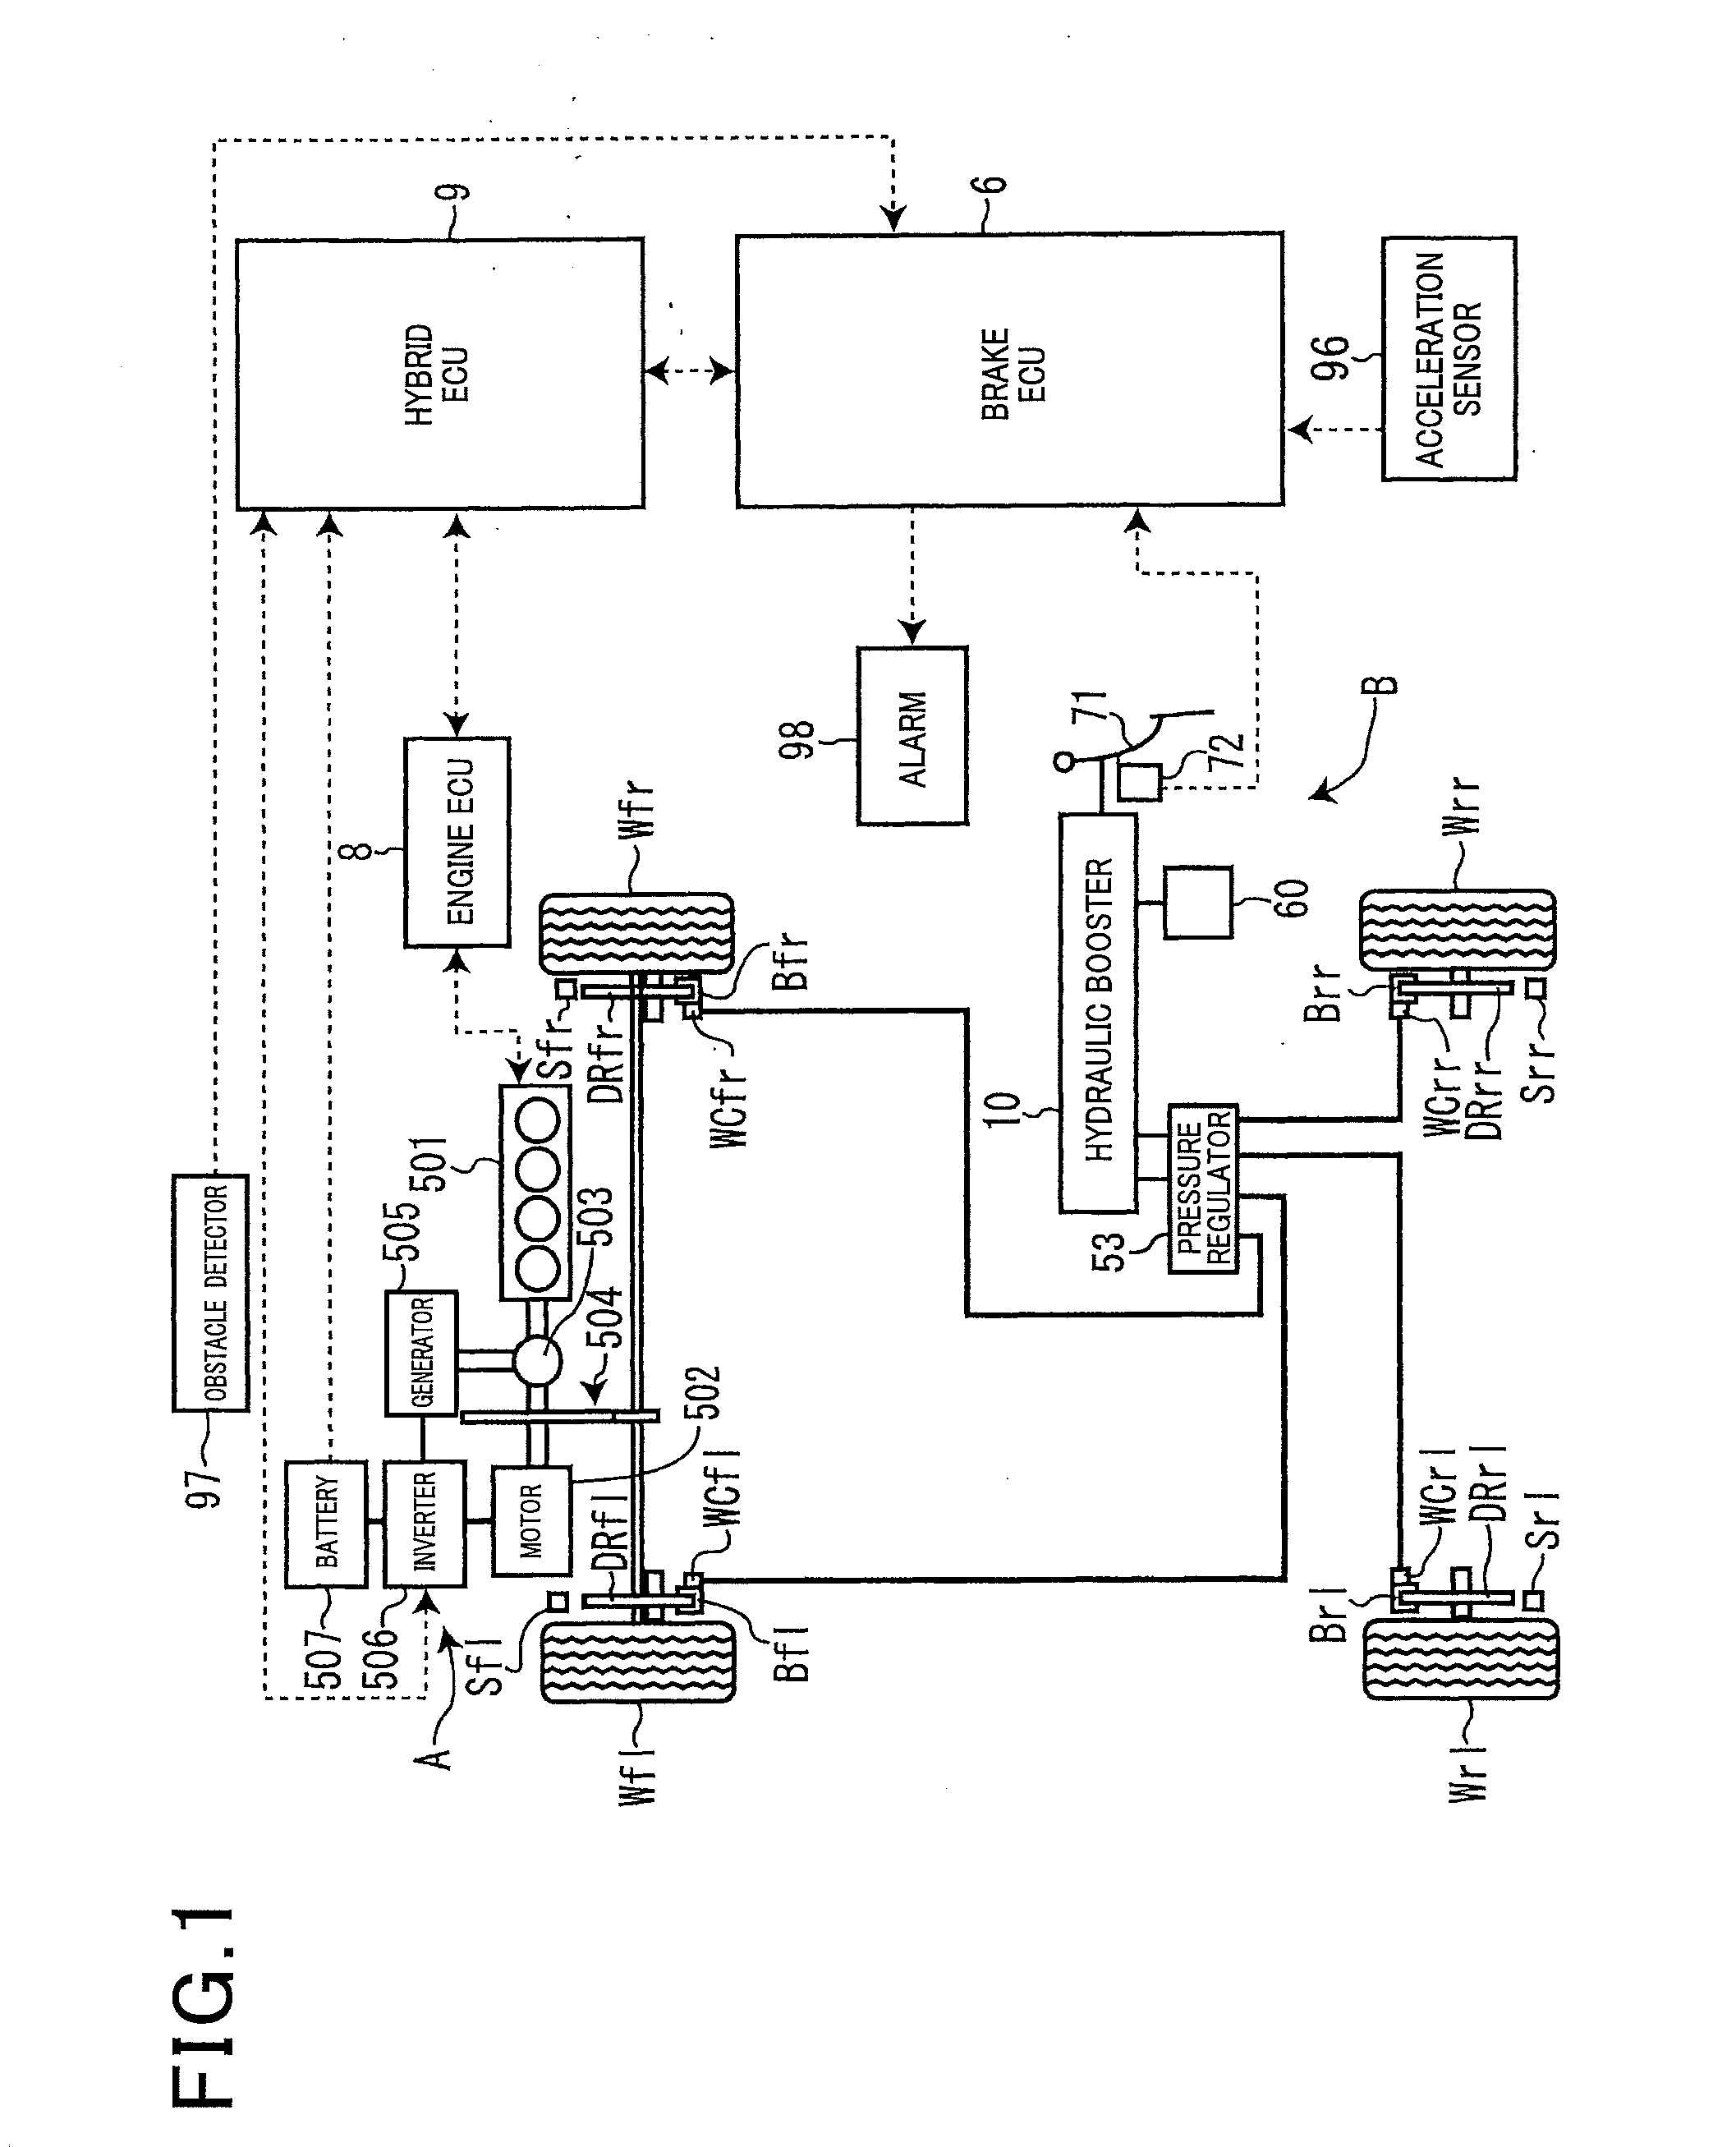 Brake system for vehicle with collision avoidance mechanism